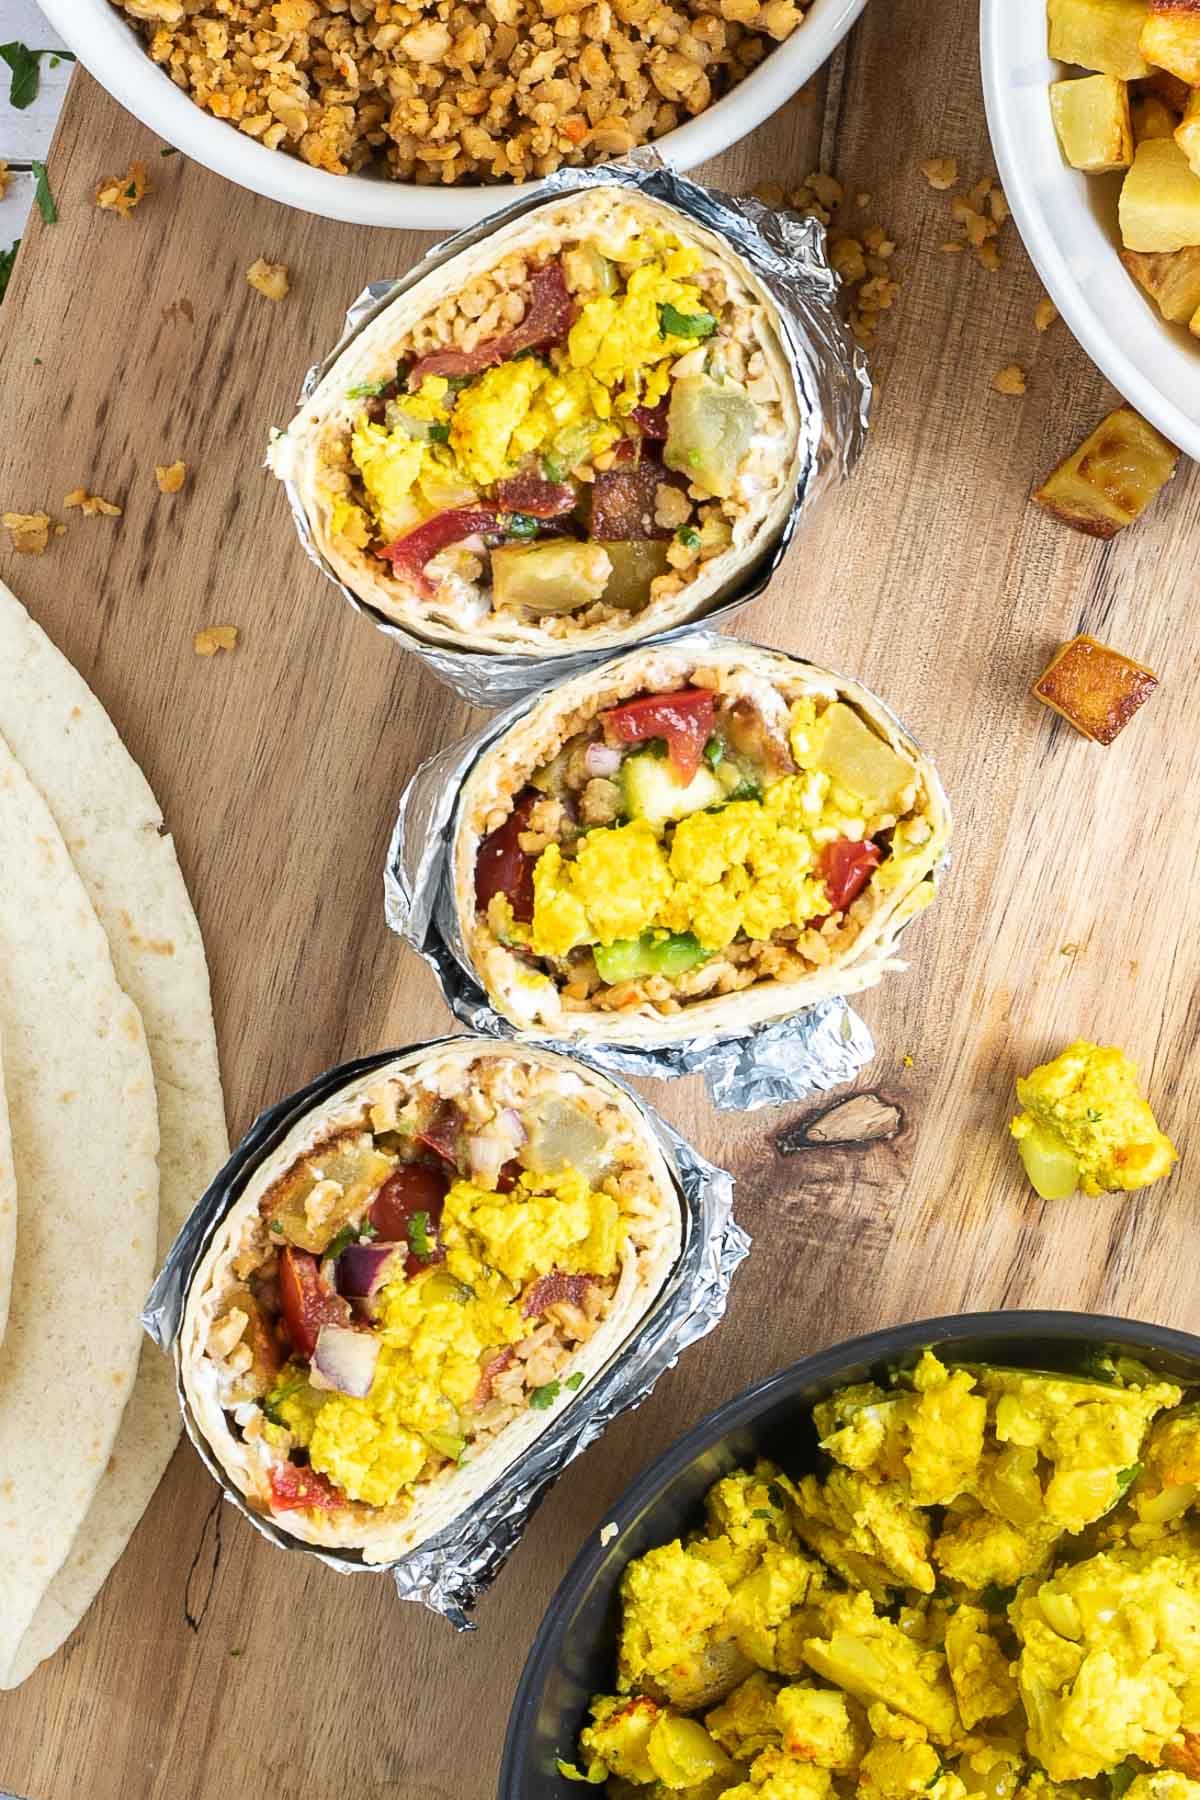 3 half tortillas wrapped in tin foil filled with sausage crumbles, diced potatoes, tofu scrambles, and avocado tomato salsa. The remaining fillings are placed in several bowls on a wooden platter.